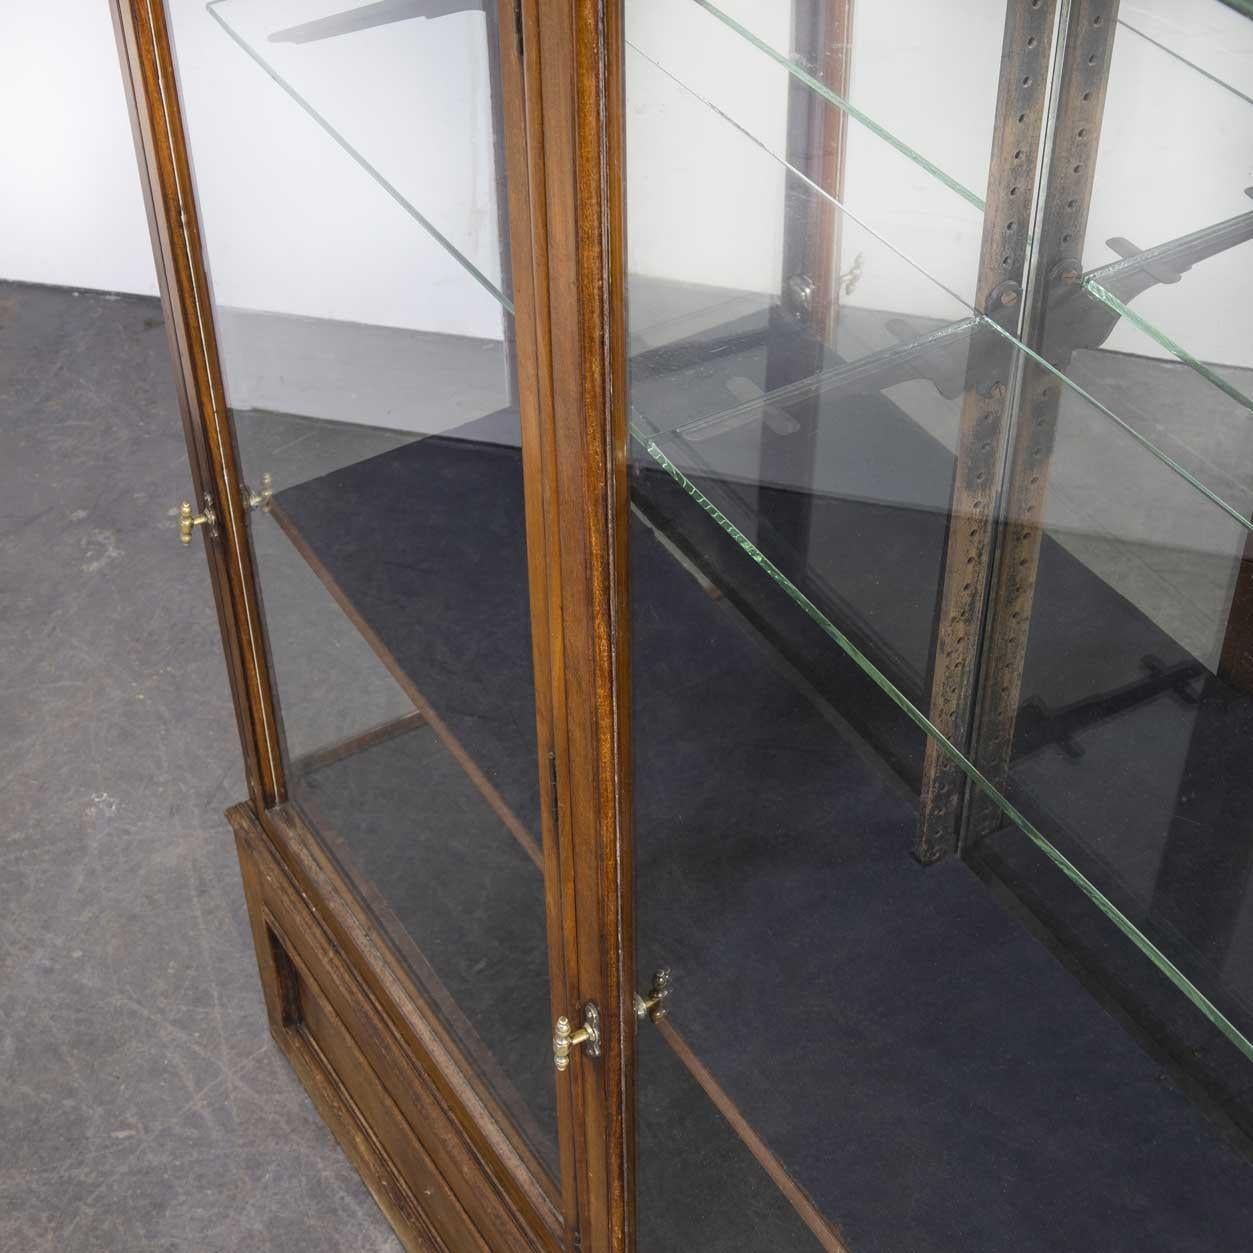 19th century large original mirrored victorian display cabinet
19th century large original mirrored victorian display cabinet. Exceptional original Victorian display cabinet from the late 19th Century. Made principally in solid mahogany it is